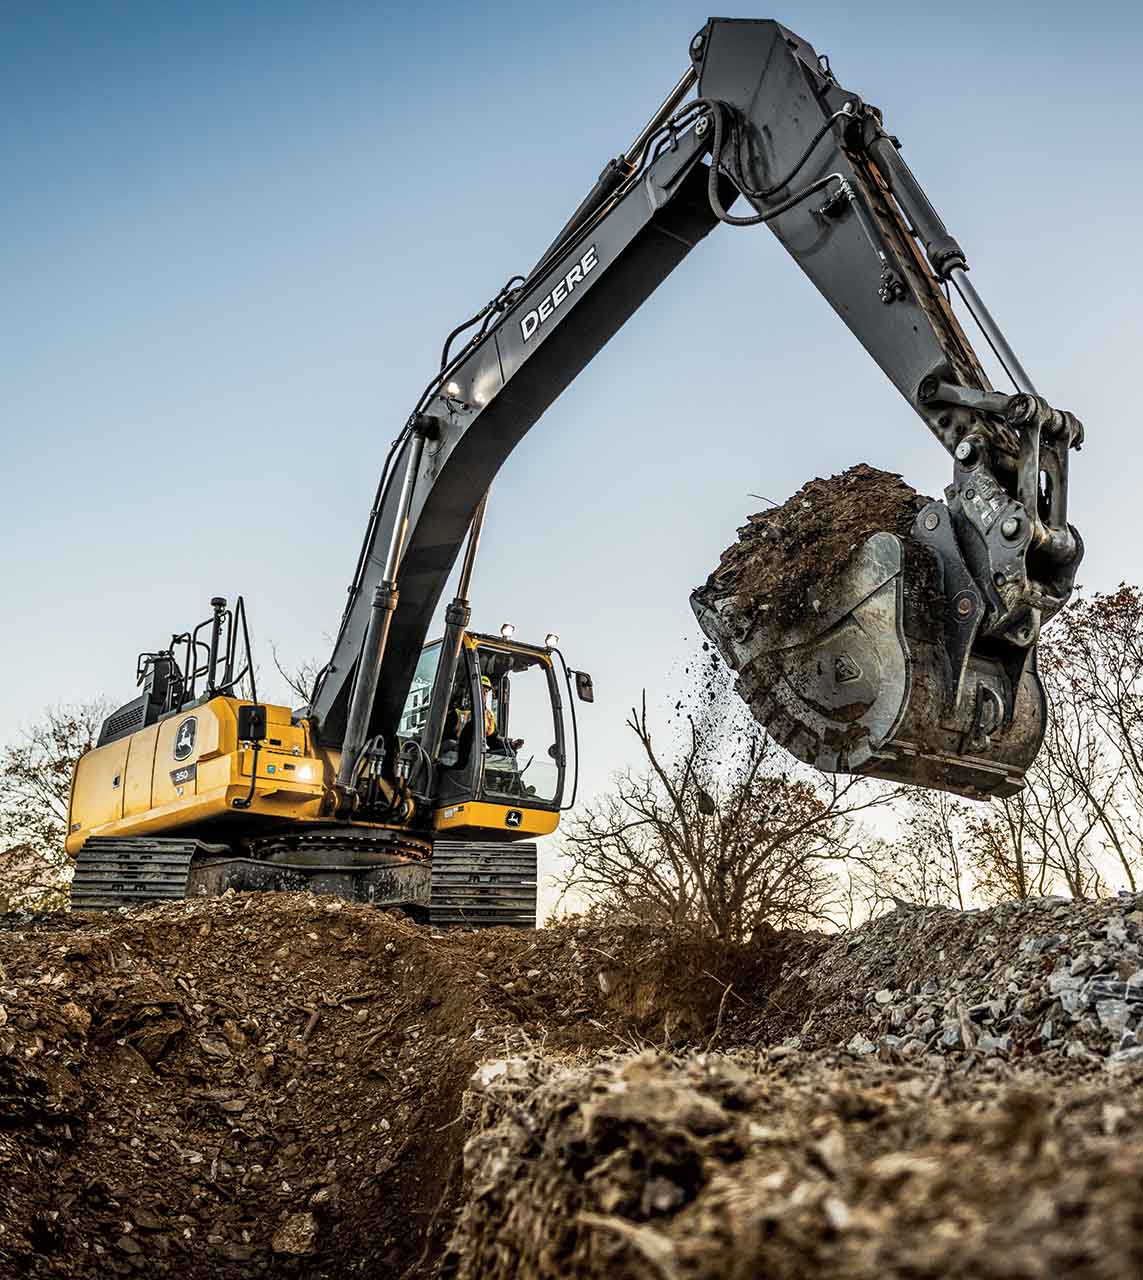 John Deere excavator powerfully lifts a bucket overflowing with dirt